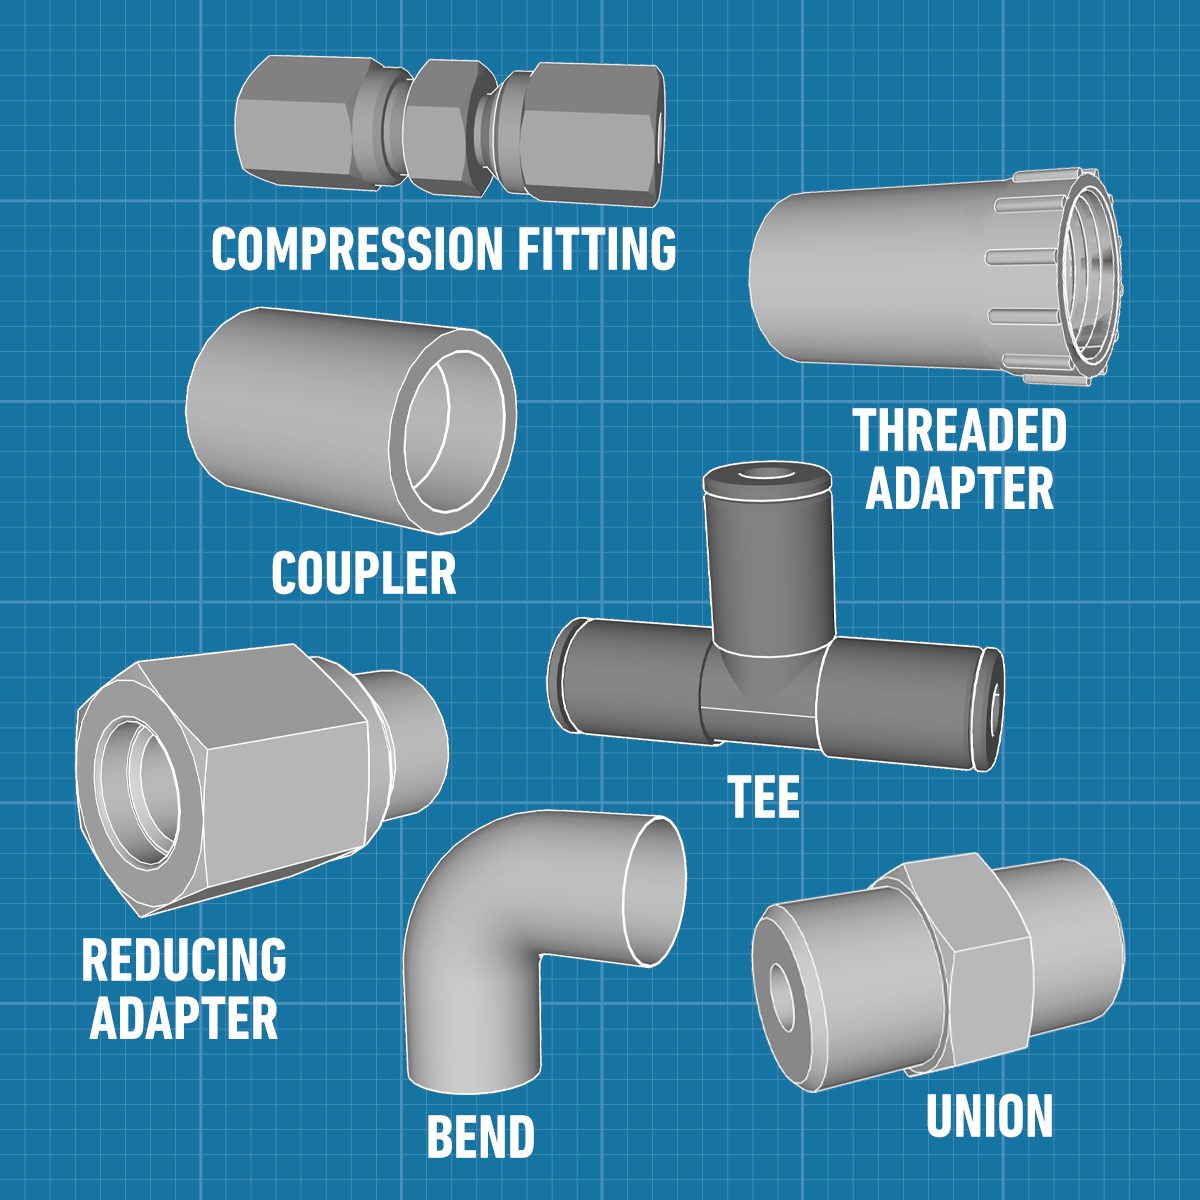 plumbing - What's the difference between these two types of compression  fittings? - Home Improvement Stack Exchange